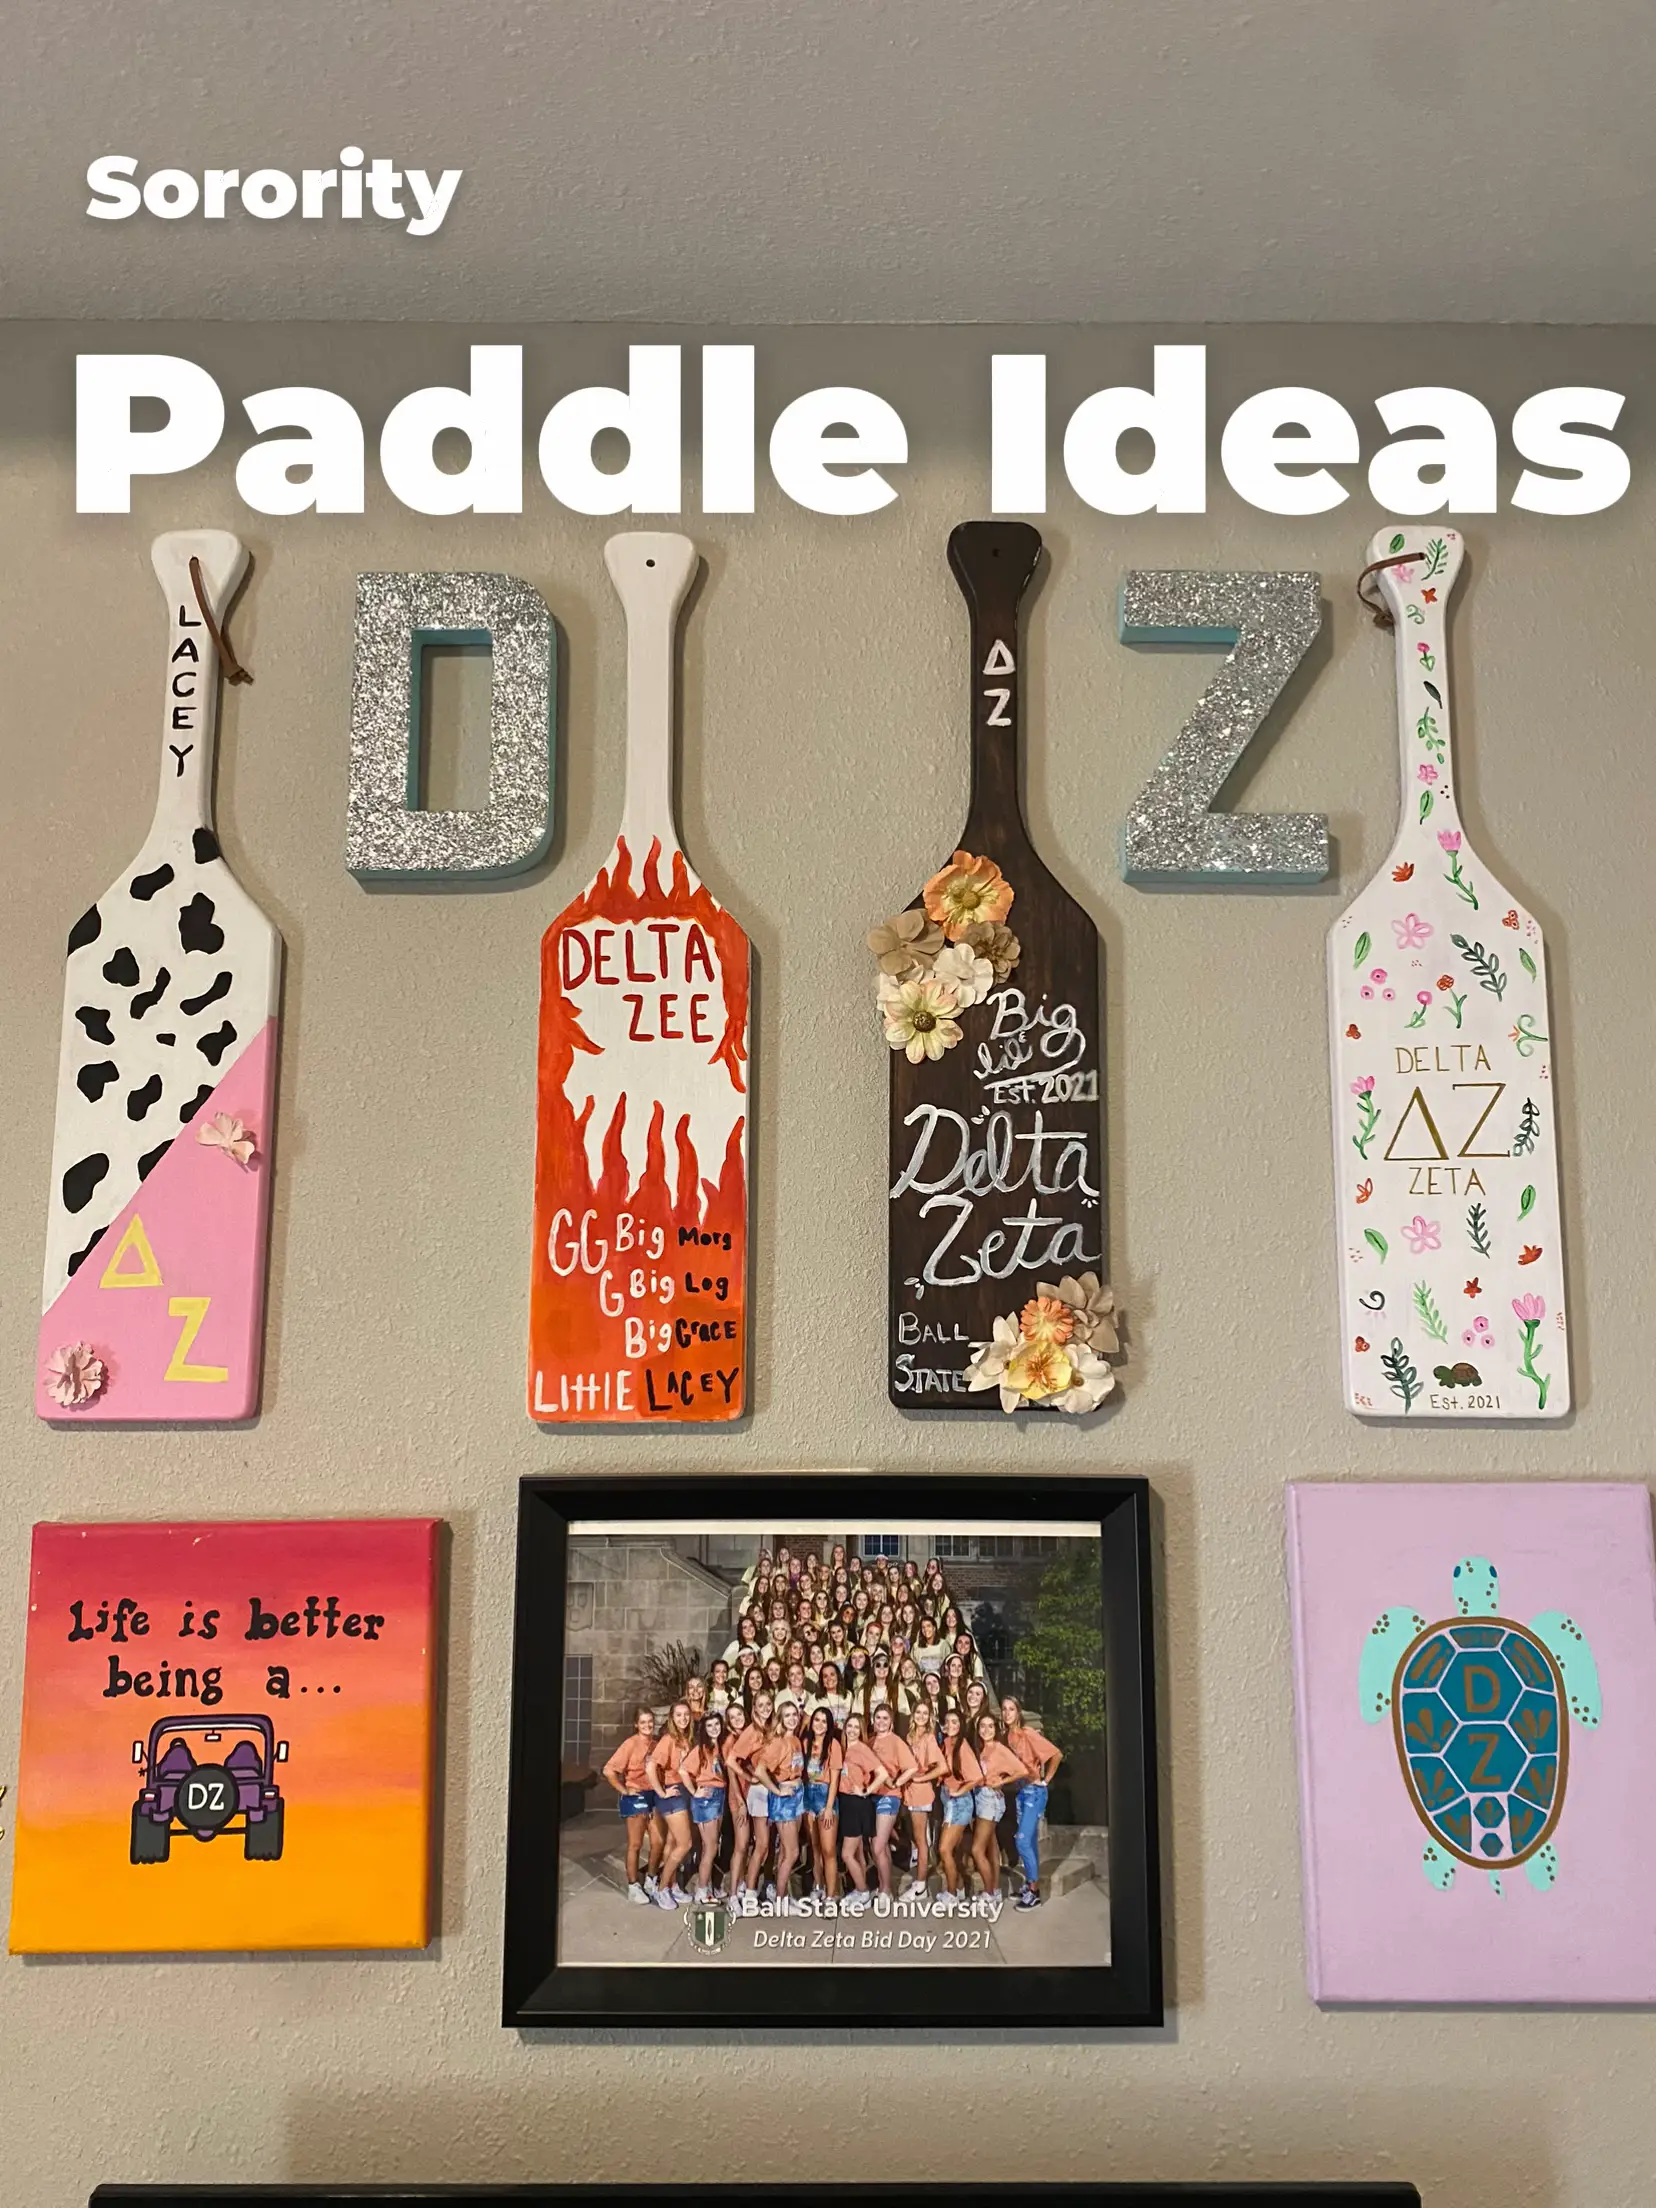 Sorority Paddle Ideas Gallery Posted